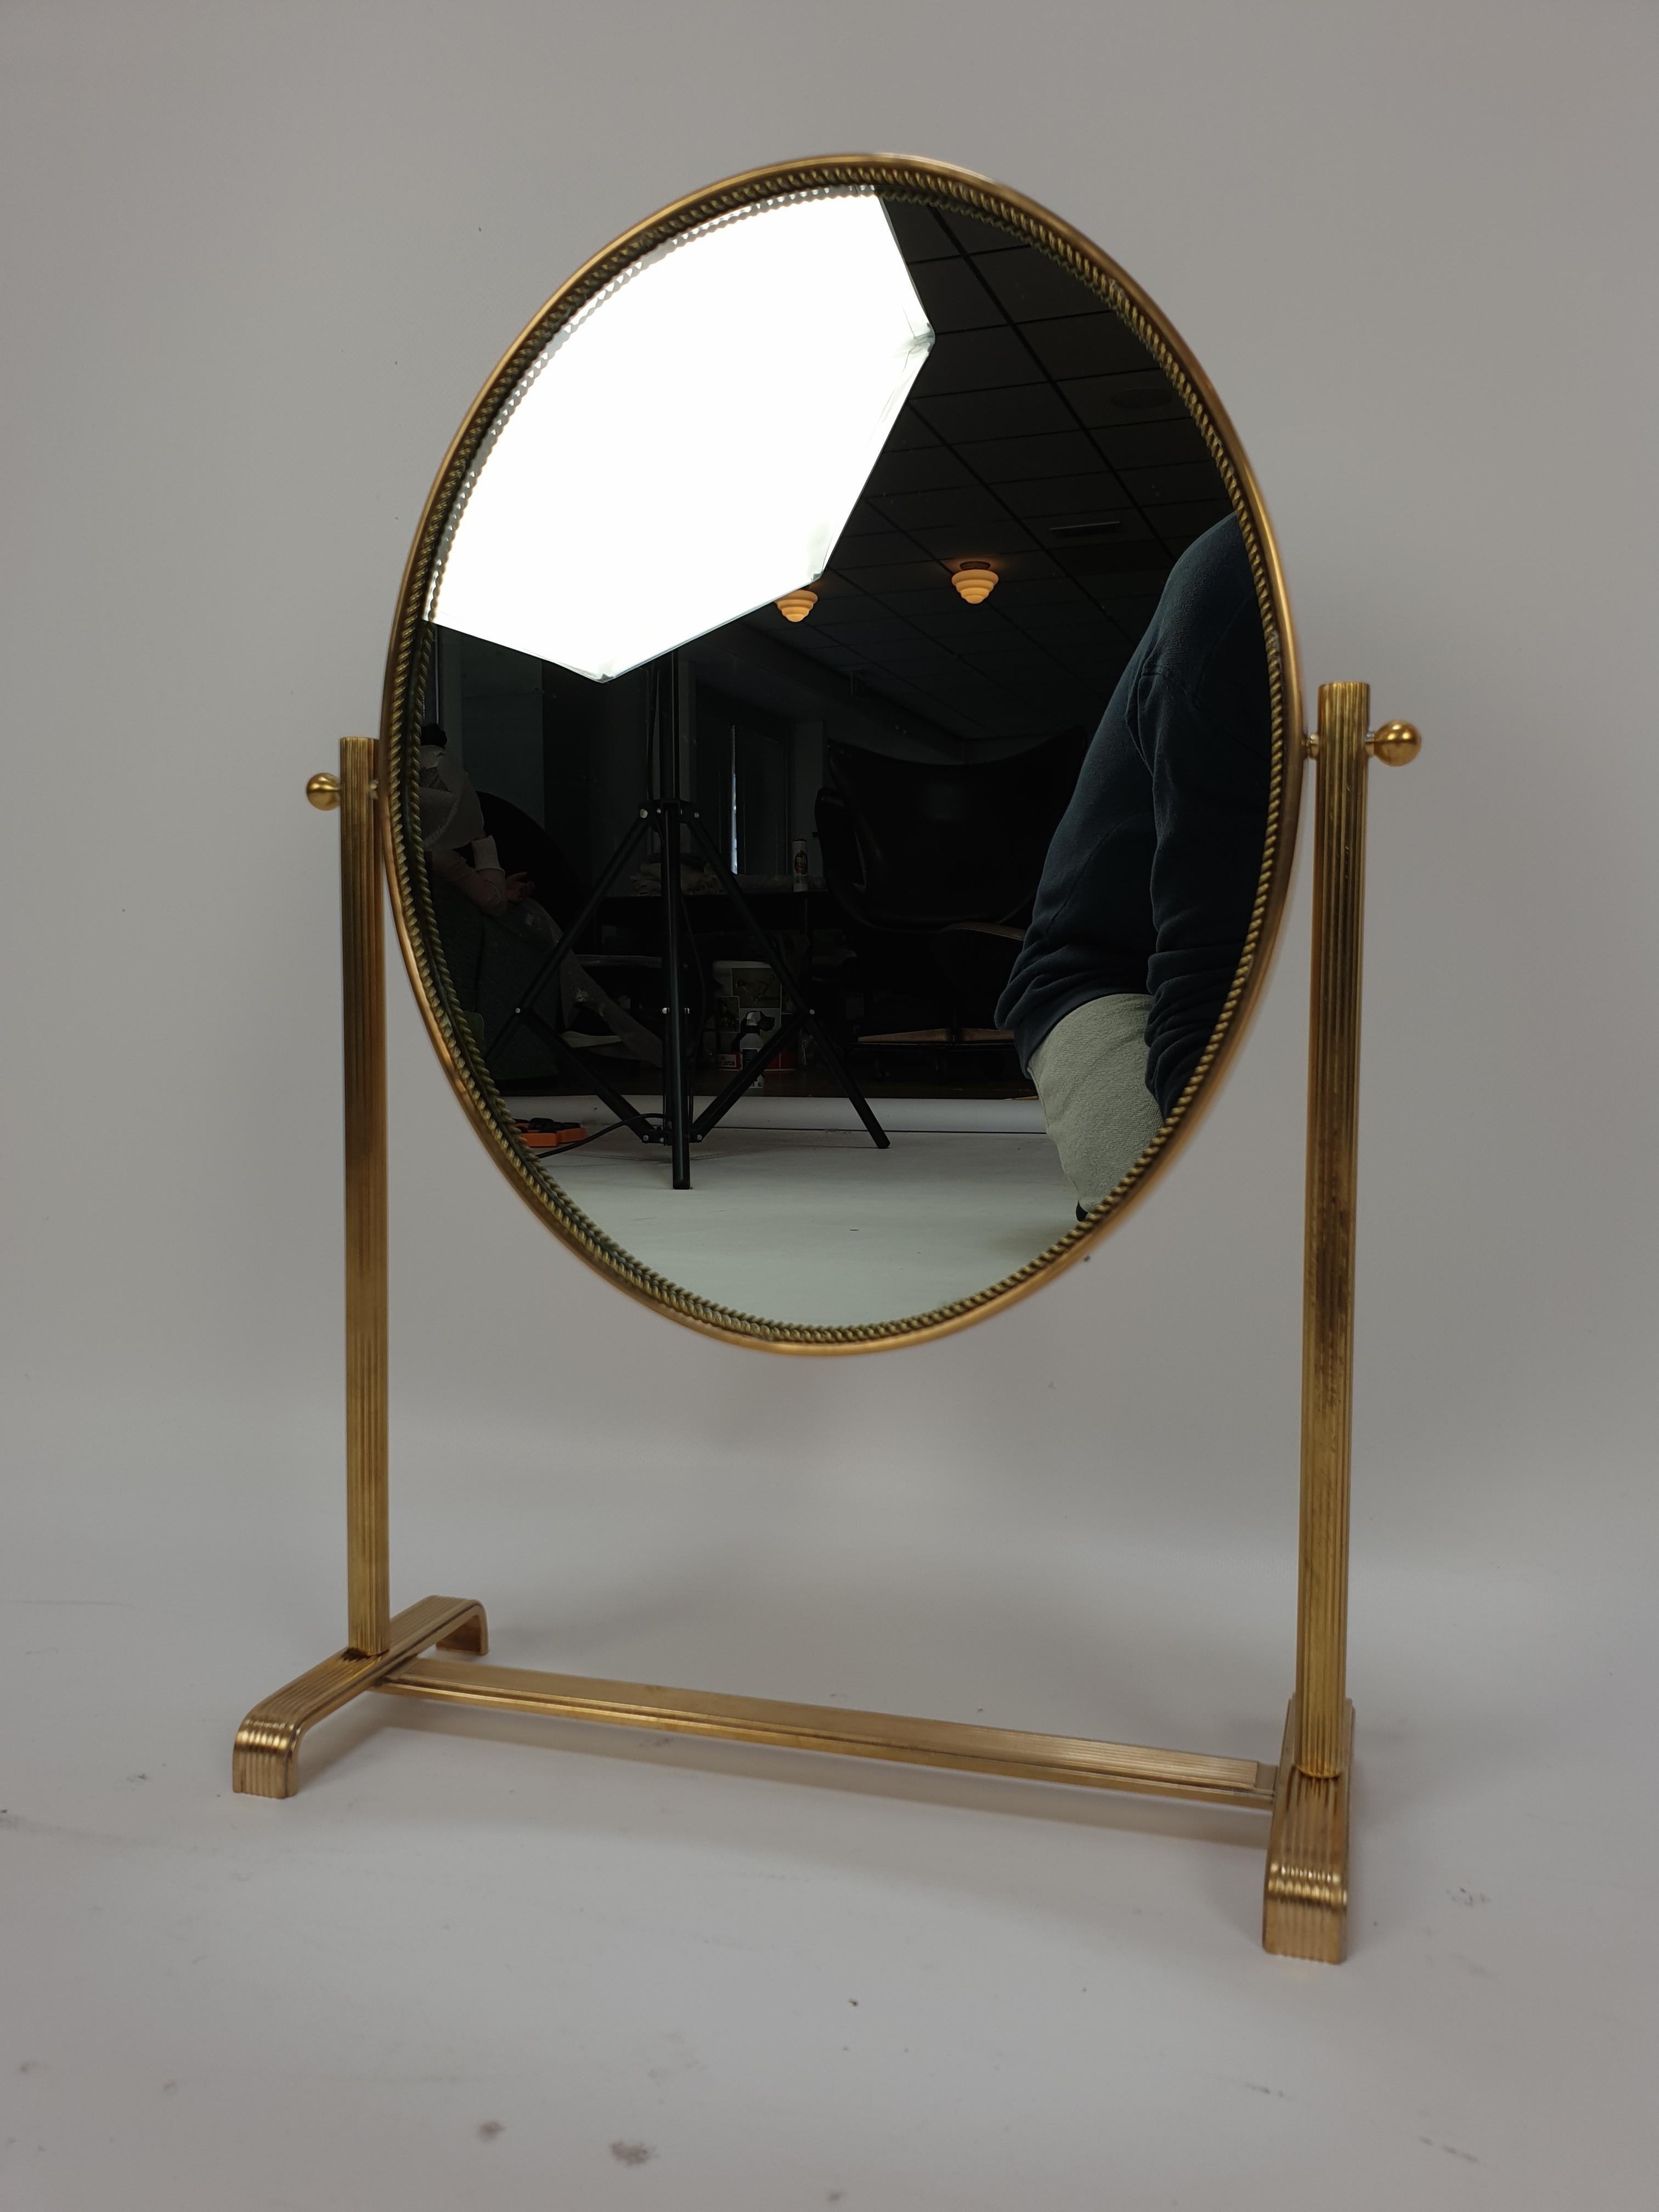 Gorgeous vanity mirror with full brass frame and base. Made in Italy in the 1950s. The round frame has decorative details. The mirror can be turned around. The back plate is made of dark wood. The mirror glass has been renewed, nevertheless there is